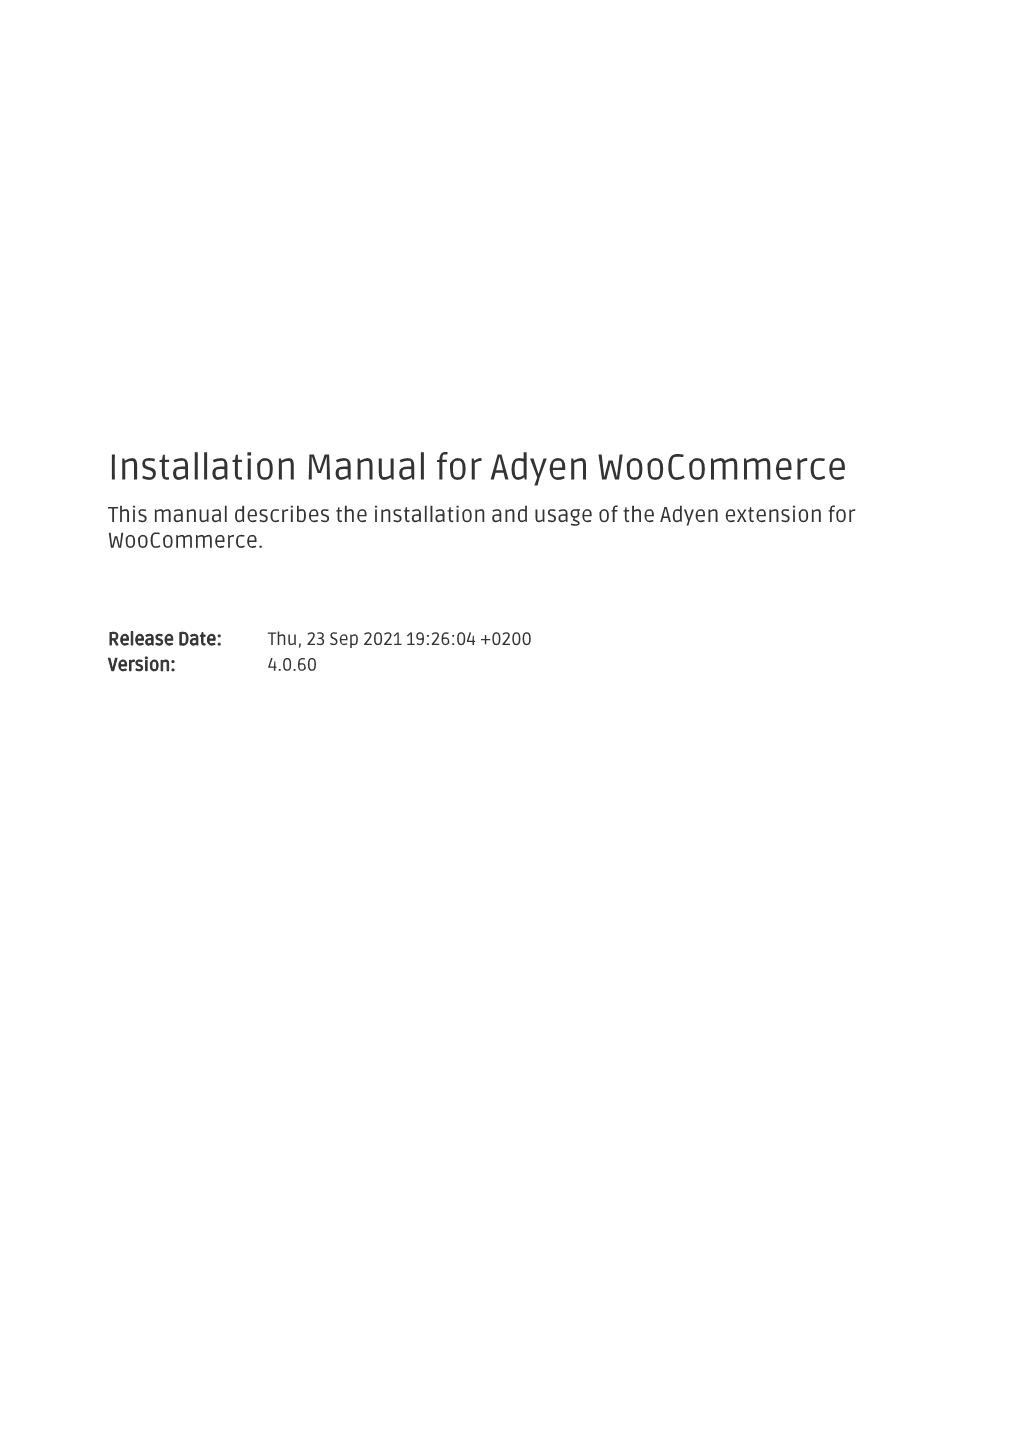 Installation Manual for Adyen Woocommerce This Manual Describes the Installation and Usage of the Adyen Extension for Woocommerce